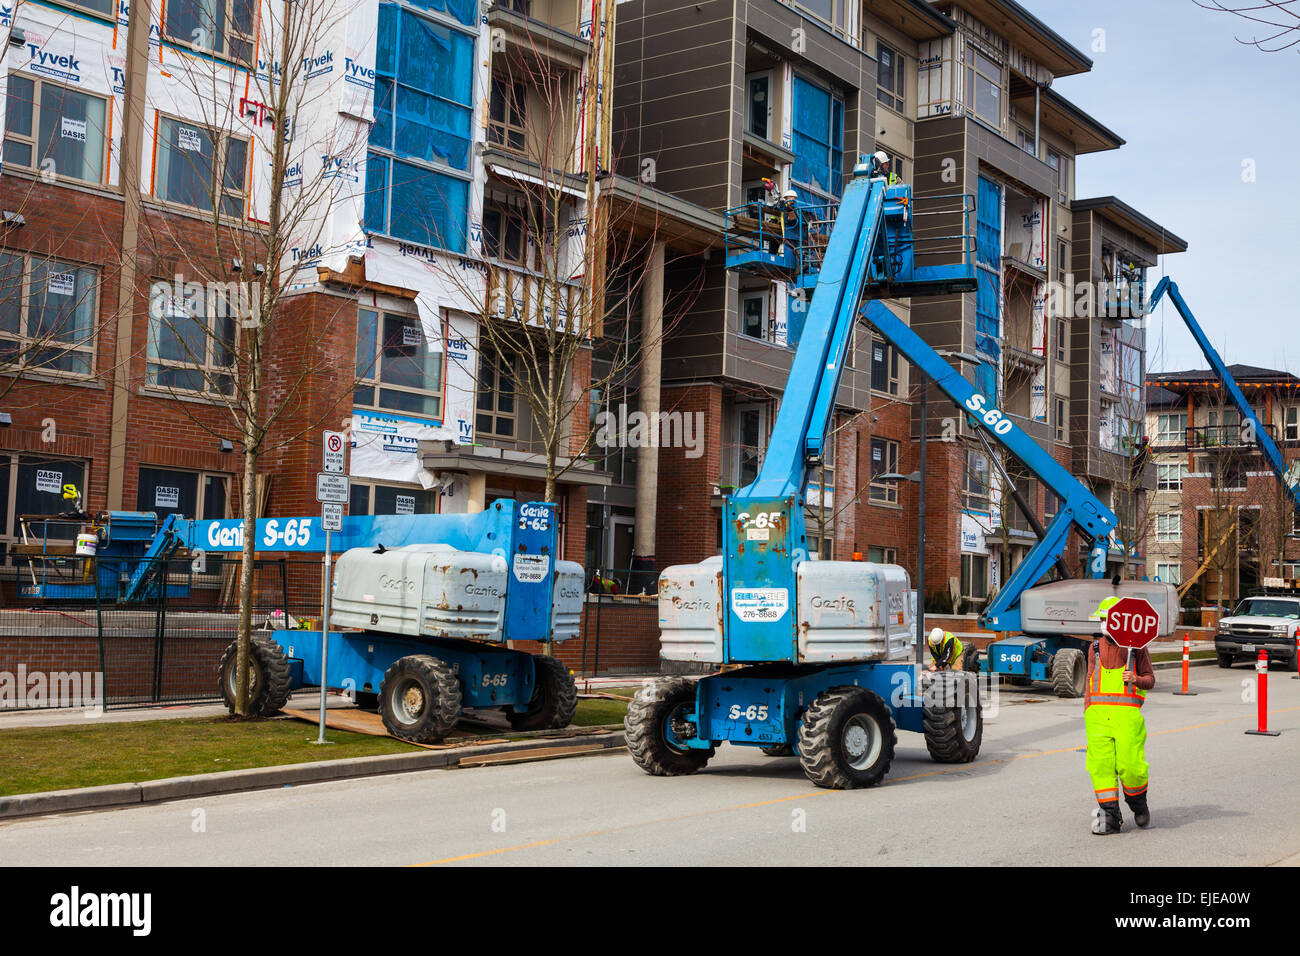 Four man-lift vehicles being used to apply exterior cladding to an apartment building Stock Photo